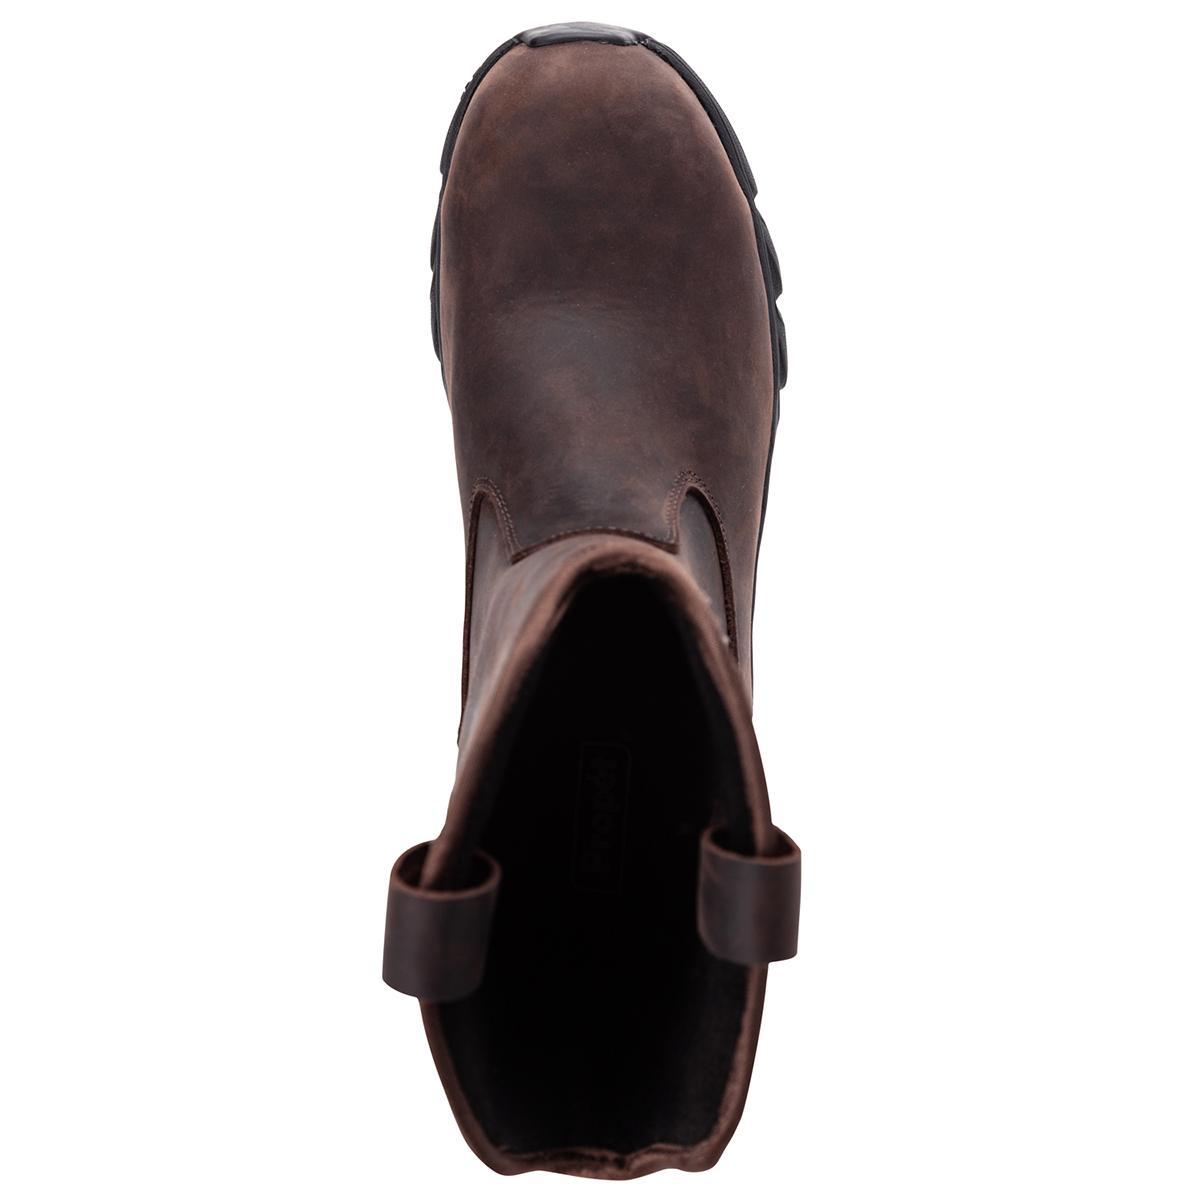 Big & Tall Propet Smith Slip-On Safety-Toe Boots Product Image